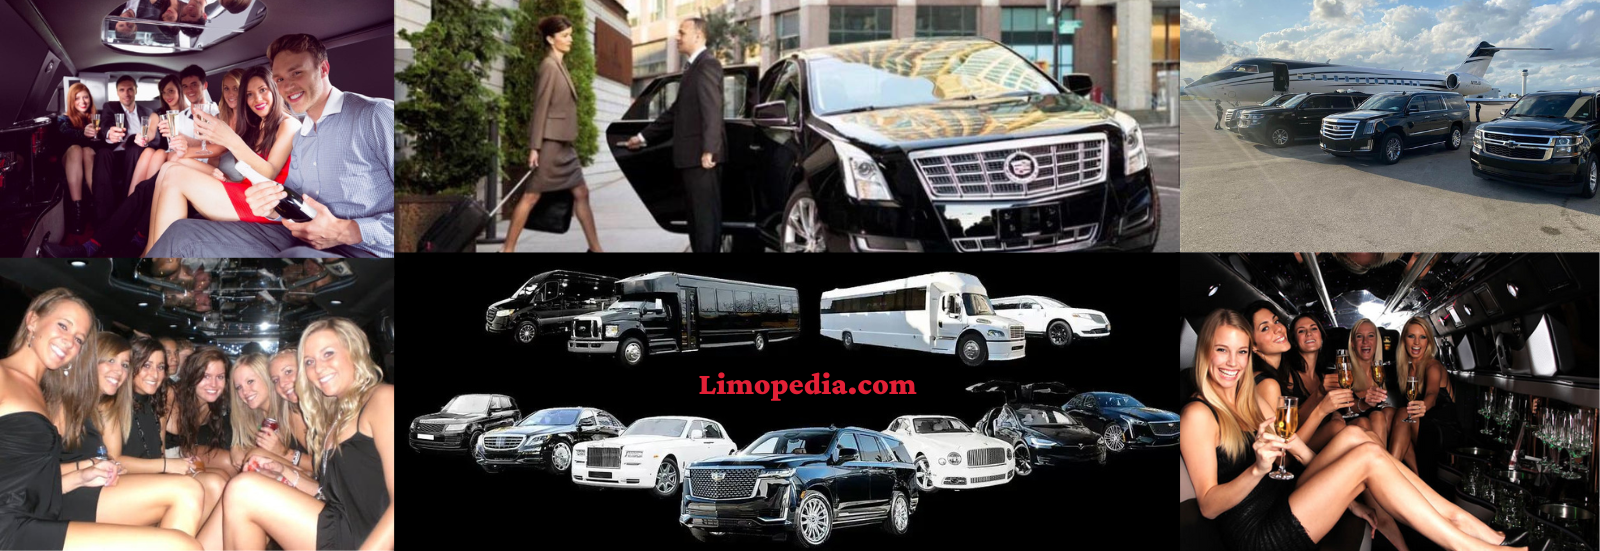 Miami Airport Car Service ✅Car Service to Miami Airport ✅Car Service Miami airport free Airport Meet & Greet Service MIA, Miami Airport Car ServicesCar Service Miami Airport to South BeachCar Service Miami Airport To Miami HotelsCar Service Miami Airport To Miami BeachCar Service Miami Airport To Sunny IslesCar Service Miami Airport To Fort LauderdaleCar Service Miami Airport To Boca RatonCar Service Miami Airport To West Palm BeachCar Service Miami Airport To Key WestCar Service Miami Airport To OrlandoCar Service Miami Airport To NaplesCar Service Miami Airport To Fort MyersCar Service From Miami Airport To TampaCar Service From Miami Airport to Cruise PortsCar Service Miami Airport To Port MiamiCar Service Miami Airport To Port EvergladesCar Service Miami Airport To Port CanaveralChauffeur Service Miami City Car Service is available to and from Mia International Airport (MIA) or around town in Miami and south beach. Select your ride from a wide choice of vehicles, black cars, sedans, town cars, SUVs, limousines, and Limos. Our professional, insured drivers provide amazing customer service that will exceed your expectations and focus on your safety inspected vehicles, classy, comfort, satisfaction. Our duty is to provide high-quality, safe, and reliable rides for business and leisure travelers in Miami and South Florida. Book with easy online reservations, vehicles service app or our 24-hours available reservation service .and FLL Airport to Vero beach Car Service ✓ We Provide 24/7 ✓With Limopedia Book Now Best Price Guarantee Miami beach to Miami airport, Miami International Airport car service, Miami limo service, Miami car Service, Vip Limo, Limousine Black Car Service Miami FL, driven Miami Miami Car Service MIA Airport Transfer, Port of Miami & Port Everglades Transfer, Fort Lauderdale, Boca Rotan, Palm Beach, Florida Keys, Miami To Orlando, Private Chauffeur Service ( MiA, FLL Airport Transfers) Miami airport taxi Service and Sedan Car Service. Car service for Fort Lauderdale Airport. Car service from Ft Lauderdale airport to Miami.Book airport transportation, corporate or private town car service with premium Miami limousine service and enjoy a comfortable ride, car service in Miami car service Miami, car service to Miami, car services in Miami, Miami car service, limo service in Miami, limo service Miami, limo services Miami, Miami limo service, Miami limo services, car service from Miami airport car service in Miami airport, car service to Miami airport Miami offers airport transfers to and from MIA and FLL airports. Miami airport transportations. Miami airport transfer, airport transfer Miami, Airport shuttle Miami , Miami airport shuttle, Mia airport transfer, airport transfer Miami , Miami international airport transfer, airport transfer Miami, Miami airport cruise transfer, Miami airport car transfer, Miami airport transfer desk, Hilton Miami airport transfer, Marriot Miami hotel transfer, Miami executive airport transfer, Miami airport transfer fort Lauderdale, Miami airport transfer to Fort Lauderdale, Fontainebleau hotel airport transfer, transfer Miami to Fort Lauderdale cruise port, Miami transfer from airport, Miami international airport transfer, airport transfer in Miami, Miami airport transfer limo, Miami airport luxury transfers, transfer Miami airport to port everglades, Miami airport transfer to Miami port, mandarin oriental Miami airport transfer, Miami airport private transfer, Miami airport transfer to cruise port, Miami airport transfer to Fort Lauderdale, Miami airport transfer to south beach, Miami airport transfers to cruise terminal, Miami airport transfer to port everglades, Miami airport transfer limousine.Miami airport transfer, airport transfer Miami, Airport shuttle Miami , Miami airport shuttle, Mia airport transfer, airport transfer Miami , Miami international airport transfer, airport transfer miami, Miami airport cruise transfer, miami airport car transfer, miami airport transfer desk, hilton miami airport transfer, marriot miami hotel transfer, miami executive airport transfer, miami airport transfer fort lauderdale, miami airport transfer to fort lauderdale, Fontainebleau hotel airport transfer, transfer miami to fort lauderdale cruise port, miami transfer from airport, maimi international airport transfer, airport transfer in miami, miami airport transfer limo, miami airport luxury transfers, transfer miami airport to port everglades, miami airport transfer to miami port, mandarin oriental miami airport transfer, miami airport private transfer, miami airport transfer to cruise port, miami airport tarnsfer to fort lauderdale, miami airport transfer to south beach, miami airport tarnsfers to cruise terminal, miami airport tarnsfer to port everglades, miami airport transfer limousine, miami airport tarnsfer reviews, miami airport taxi transfers, miami airport transfer car seat, port of miami airport transfers, transfer von miami airport nach fot lauderdale, transfer von miami airport nach south beach, transfer miami airport to key west, transfer miami airport to palm beach, transfer miami airport zun hafen, transfer miami airport zum hotel , miami airport taxi credit card transfer between miami airport and fort lauderdale transfer at miami airport miami airport shuttle bus miami airport shuttle bus to hotels miami airport shuttle bus to south beach miami airport bus transfer miami airport beach shuttle sheraton miami airport shuttle bus hilton miami airport shuttle bus pullman miami airport shuttle bus marriott miami airport shuttle bus miami airport shuttle key biscayne miami airport hotel shuttle buses miami airport transfer car seat miami airport shuttle car rental miami airport shuttle cruise port miami airport cruise transfer miami airport shuttle cost miami airport taxis credit cards miami airport shuttle coupon miami airport carnival shuttle miami airport shuttle to collins avenue miami airport shuttle royal caribbean miami airport shuttle to coconut grove miami airport shuttle to city miami airport transfer domestic to international miami airport transfer desk miami airport shuttle dolphin mall miami airport shuttle downtown miami airport shuttle to downtown hotel miami airport shuttle to dodge island hilton miami downtown airport transfer miami airport express shuttle miami airport shuttle port everglades executive airport transfer miami miami airport transfer fort lauderdale miami airport shuttle fort lauderdale miami airport shuttle from naples miami airport shuttle free miami airport taxis fares miami airport shuttle from south beach miami airport flyer shuttle miami airport free shuttle to dolphin mall miami airport free shuttle hotels miami airport transfer to fort lauderdale port miami airport free shuttle to port miami airport shuttle to fort lauderdale cruise port miami airport shuttle to fontainebleau miami airport shuttle to ft lauderdale port miami airport shuttle to fort myers transfer miami airport fort lauderdale cruise port transfer miami airport fort lauderdale cruise terminal miami airport go shuttle miami airport shuttle hotel miami airport hotel transfer miami airport hilton shuttle miami airport hotel shuttle free miami airport hotel shuttle to port miami airport hertz shuttle miami airport hotel shuttle area miami airport shuttle to hollywood miami airport international transfer miami airport transfer domestic to international miami airport shuttle to islamorada miami international airport transfer time airport transfer in miami miami airport shuttle key biscayne miami airport keys shuttle miami airport shuttle to key west miami airport transfer limo miami airport shuttle locations miami airport transfer fort lauderdale miami airport hotel shuttle location miami airport shuttle fort lauderdale miami airport transfer to fort lauderdale port transfer miami airport fort lauderdale cruise port transfer miami airport fort lauderdale cruise terminal airport transfer miami to ft lauderdale transfer miami airport to fort lauderdale hotel miami airport shuttle marriott miami airport shuttle map miami airport mall shuttle miami airport marriott shuttle pick up miami airport shuttle dolphin mall miami airport shuttle to marathon miami airport transfer to miami port mandarin oriental miami airport transfer miami hotel melbourne airport transfer miami airport naples shuttle miami airport ncl shuttle miami airport shuttle phone number miami airport orlando shuttle mandarin oriental miami airport transfer private transfer miami airport to orlando miami airport shuttle phone number miami airport shuttle parking miami airport shuttle port everglades miami airport port transfer miami airport private transfers miami airport parking shuttle to port miami airport transfer to cruise port miami airport hotel shuttle pick up alamo miami airport shuttle port miami airport marriott shuttle pick up miami airport transfer to fort lauderdale port pullman miami airport transfer miami airport taxis rates miami airport shuttle royal caribbean miami airport shuttle reviews miami airport regency shuttle miami airport shuttle car rental miami airport shuttle tri rail transfer miami airport boca raton miami airport transfers miami airport transfers to south beach miami airport transfers to cruise terminal miami airport transfers to port everglades miami airport transfers limo miami airport transfers reviews miami airport shuttle south beach miami airport shuttle service to hotels miami airport shuttle service to fort lauderdale miami airport shuttle service to orlando miami airport sheraton shuttle miami airport transfer car seat miami airport taxi transfers marriott miami airport shuttle schedule miami airport shuttle to south beach hotels hilton miami airport shuttle service miami university airport shuttle schedule miami airport shuttle to sunny isles beach courtyard miami airport shuttle service port of miami airport transfers miami airport transfer to hotel miami airport transfer time miami airport transfer to cruise port miami airport transfer to fort lauderdale port miami airport transfer to cruise terminal miami airport shuttle to south beach miami airport shuttle to hotel miami airport shuttle to port miami airport shuttle to fort lauderdale miami airport shuttle to dolphin mall miami airport shuttle to key west miami airport shuttle to south beach hotels miami airport shuttle to carnival cruise miami airport shuttle to fort lauderdale cruise port miami airport shuttle to car rental miami airport shuttle to orlando miami airport shuttle to tri-rail station miami airport shuttle to royal caribbean miami airport shuttle to west palm beach miami airport shuttle to port everglades miami airport shuttle van tour miami airport transfer transfer von miami airport nach south beach transfer von miami airport nach fort lauderdale miami airport shuttle with car seat miami airport shuttle to west palm beach miami airport to key west transfer transfer miami airport to west palm beach miami hotels with airport transfer transfer miami airport zum hafen transfer miami airport zum hotel , Miami havaalani tarnsferleri , Miami Havaalanı Transferlər Transferi Miami Airport Danish: Miami Lufthavn Miami aireportuko transferentziak Miami Lentokenttäkuljetukset Transferts aéroport de Miami Aistrithe Aerfort Miami Aeroportos de Miami Transfers Miami Airport Yfirfærsla Trasferimenti per aeroporto di Miami transportation port of miami shuttle miami airport to miami beach miami airport to port of miami mia to fll airport shuttle miami transportation in miami south beach to miami airport miami airport to miami cruise port miami transfer airport transportation miami miami beach to miami airport mia transportation best miami airport car servicemiami vip car servicemiami beach car servicebest car service miamiluxury car service miami floridacar service fort lauderdale to miamimiami airport car rentalmiami executive car service